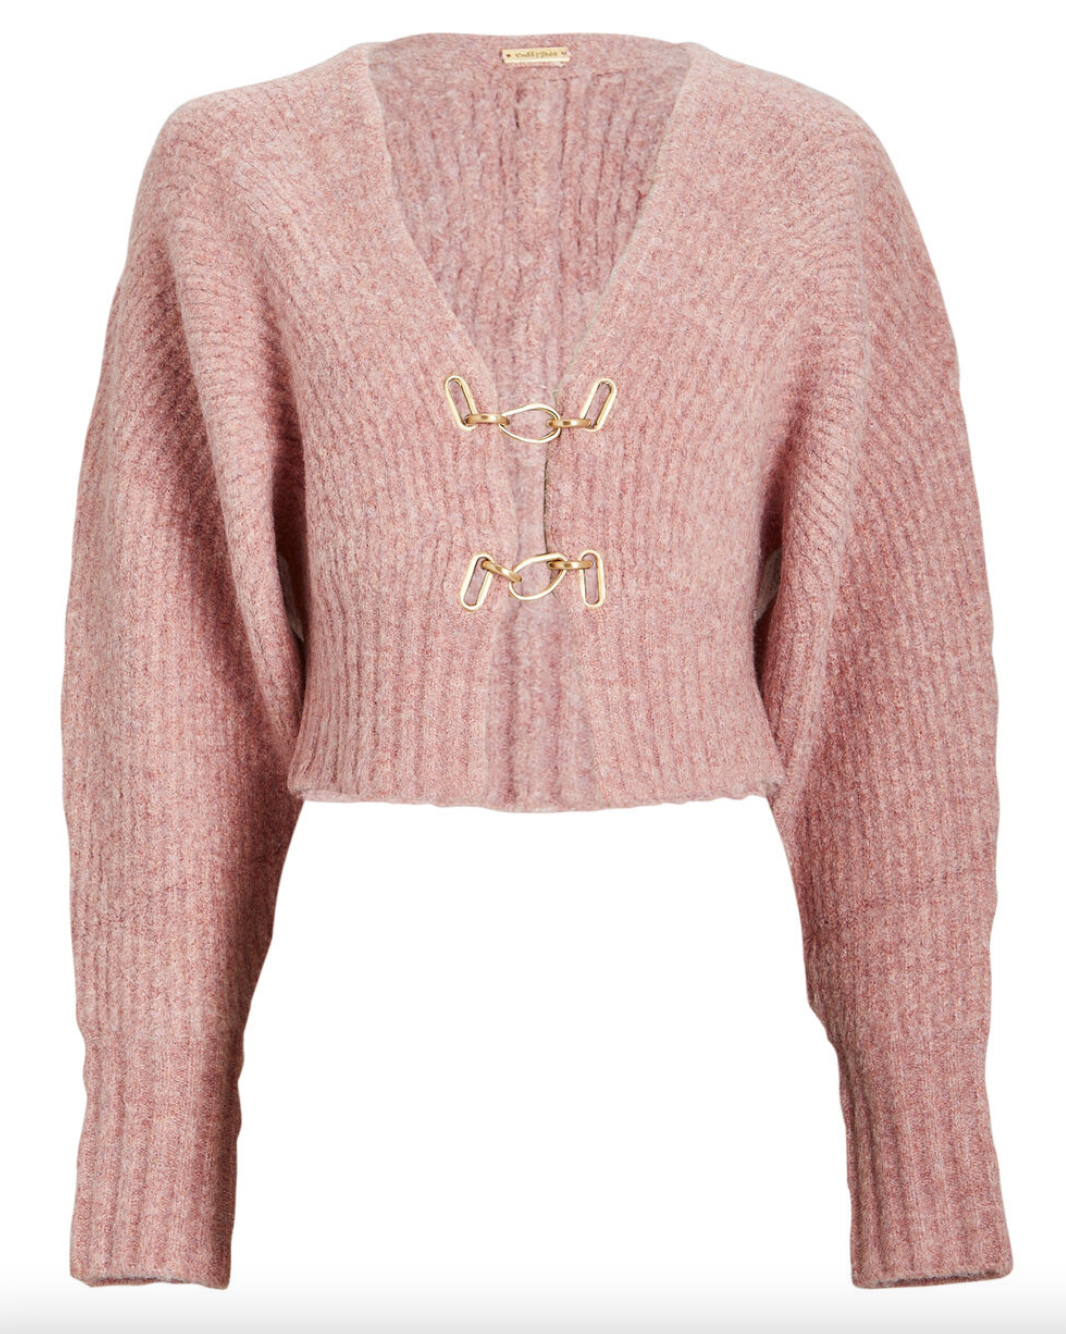 Annemarie Wiley's Pink Cutout Sweater